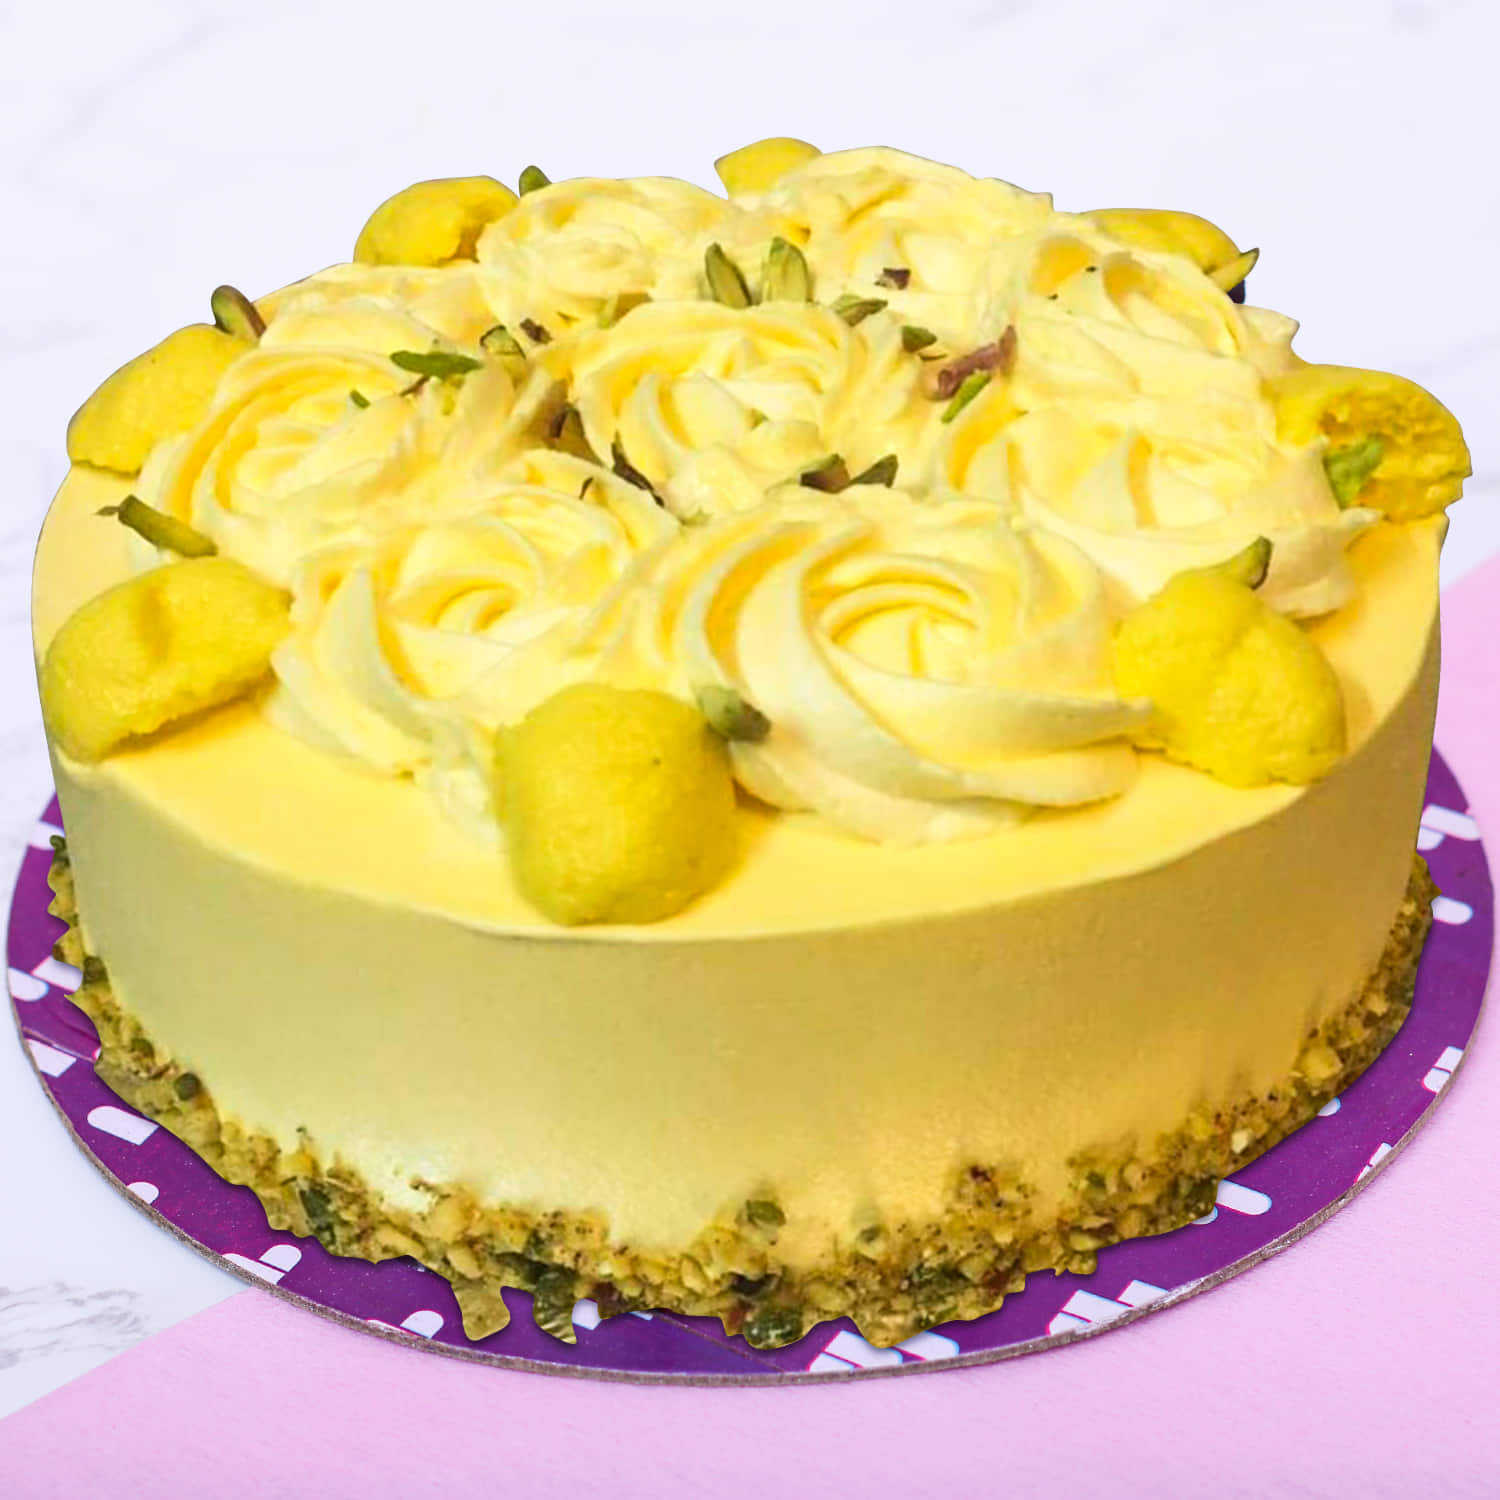 Order from #1 Online Cake Delivery - CakeZone